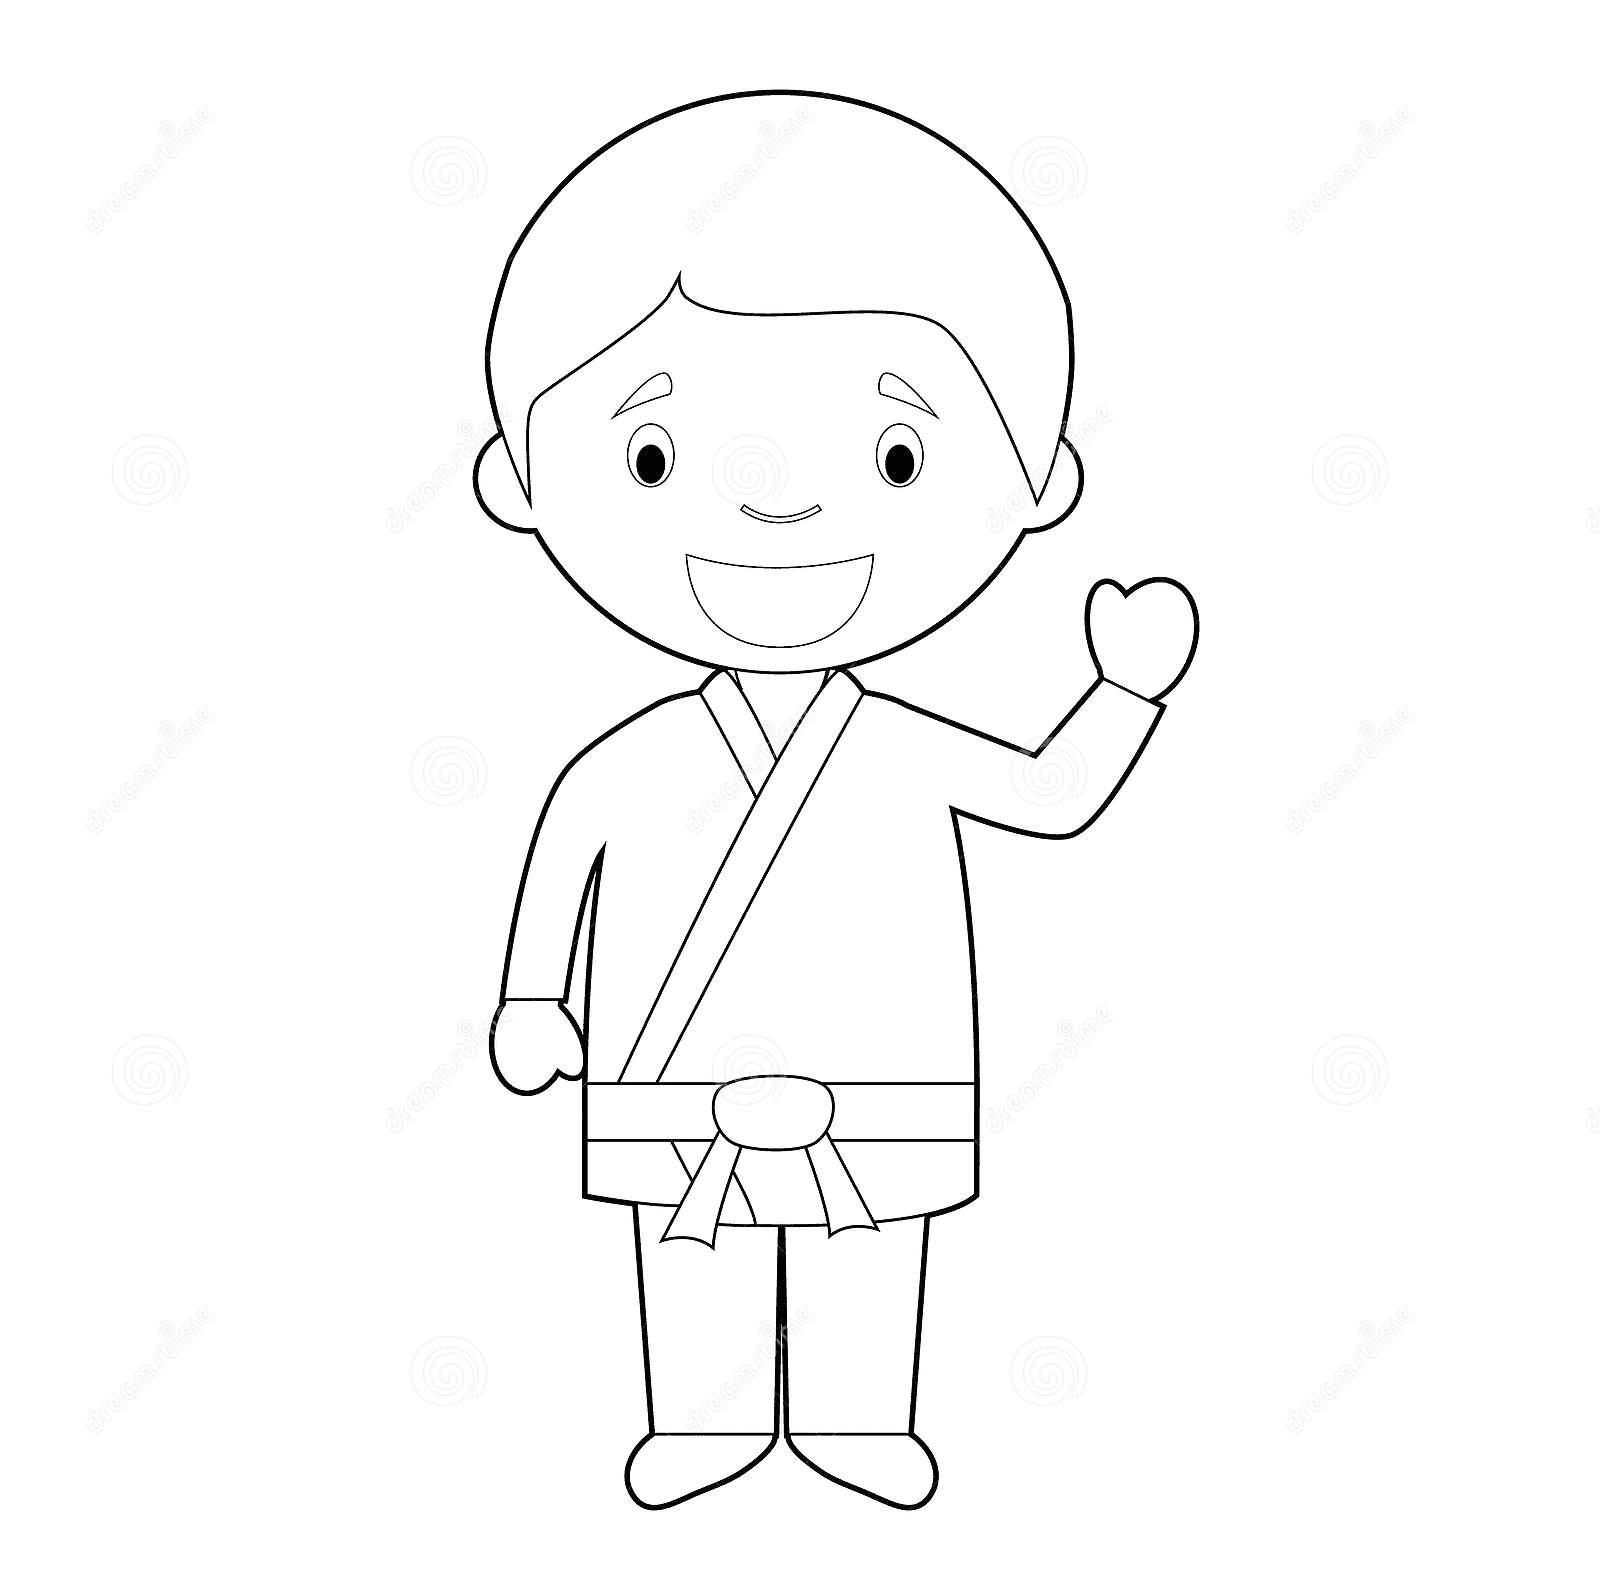 Easy Coloring Cartoon Vector Illustration Of A Karate Coloring Page